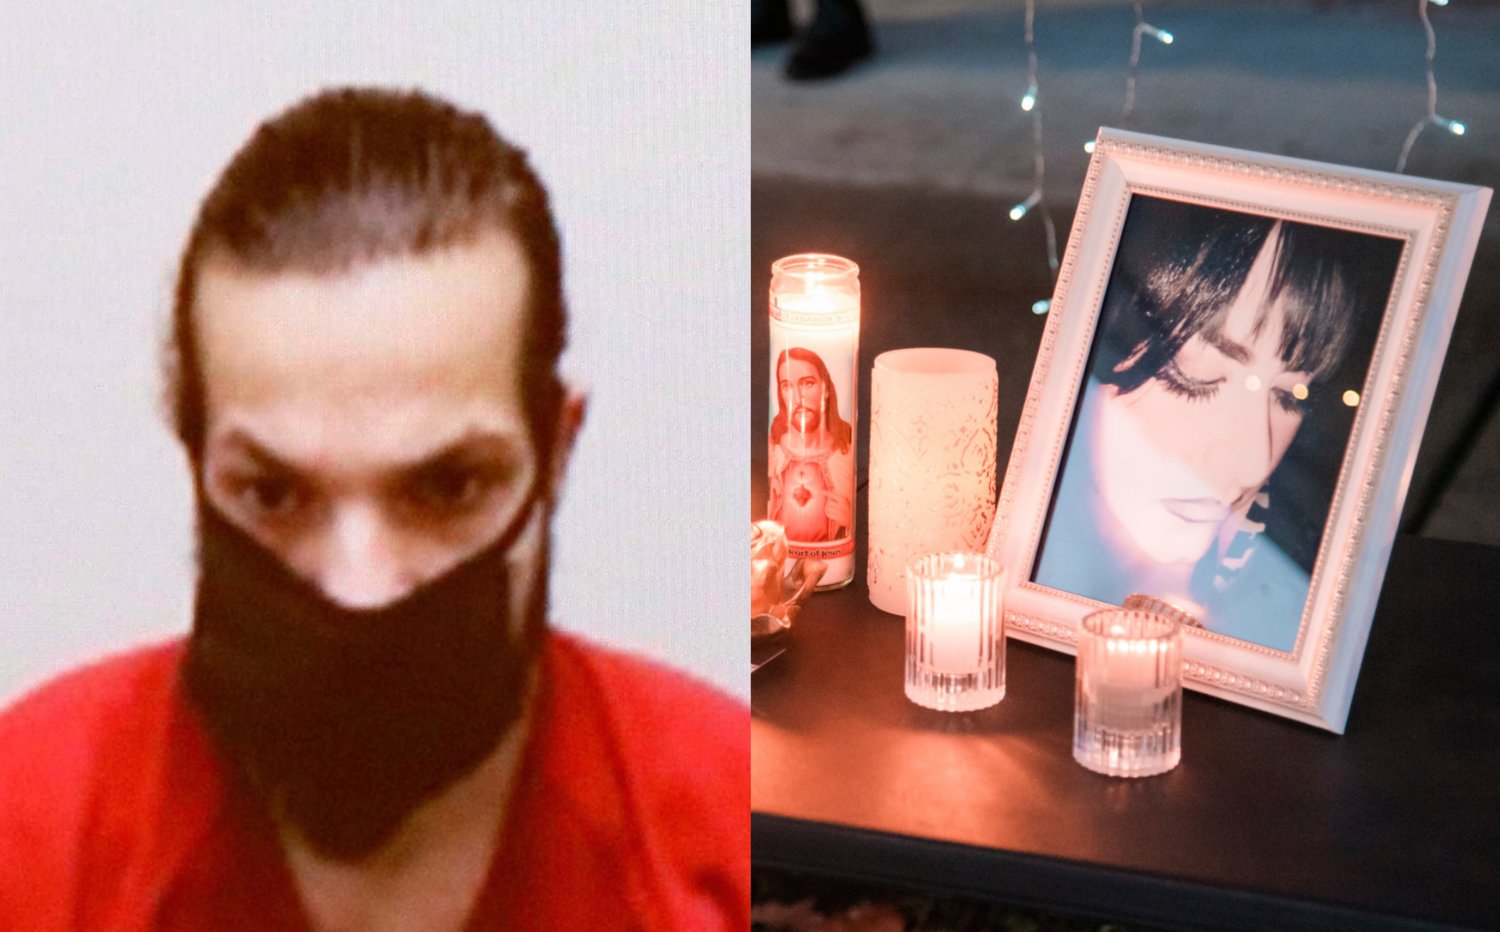 Centralia murder suspect Cristopher Allen Gaudreau is pictured at left. At right is a photograph of Rikkey Outumuro that was on display at a vigil in her honor following her death.